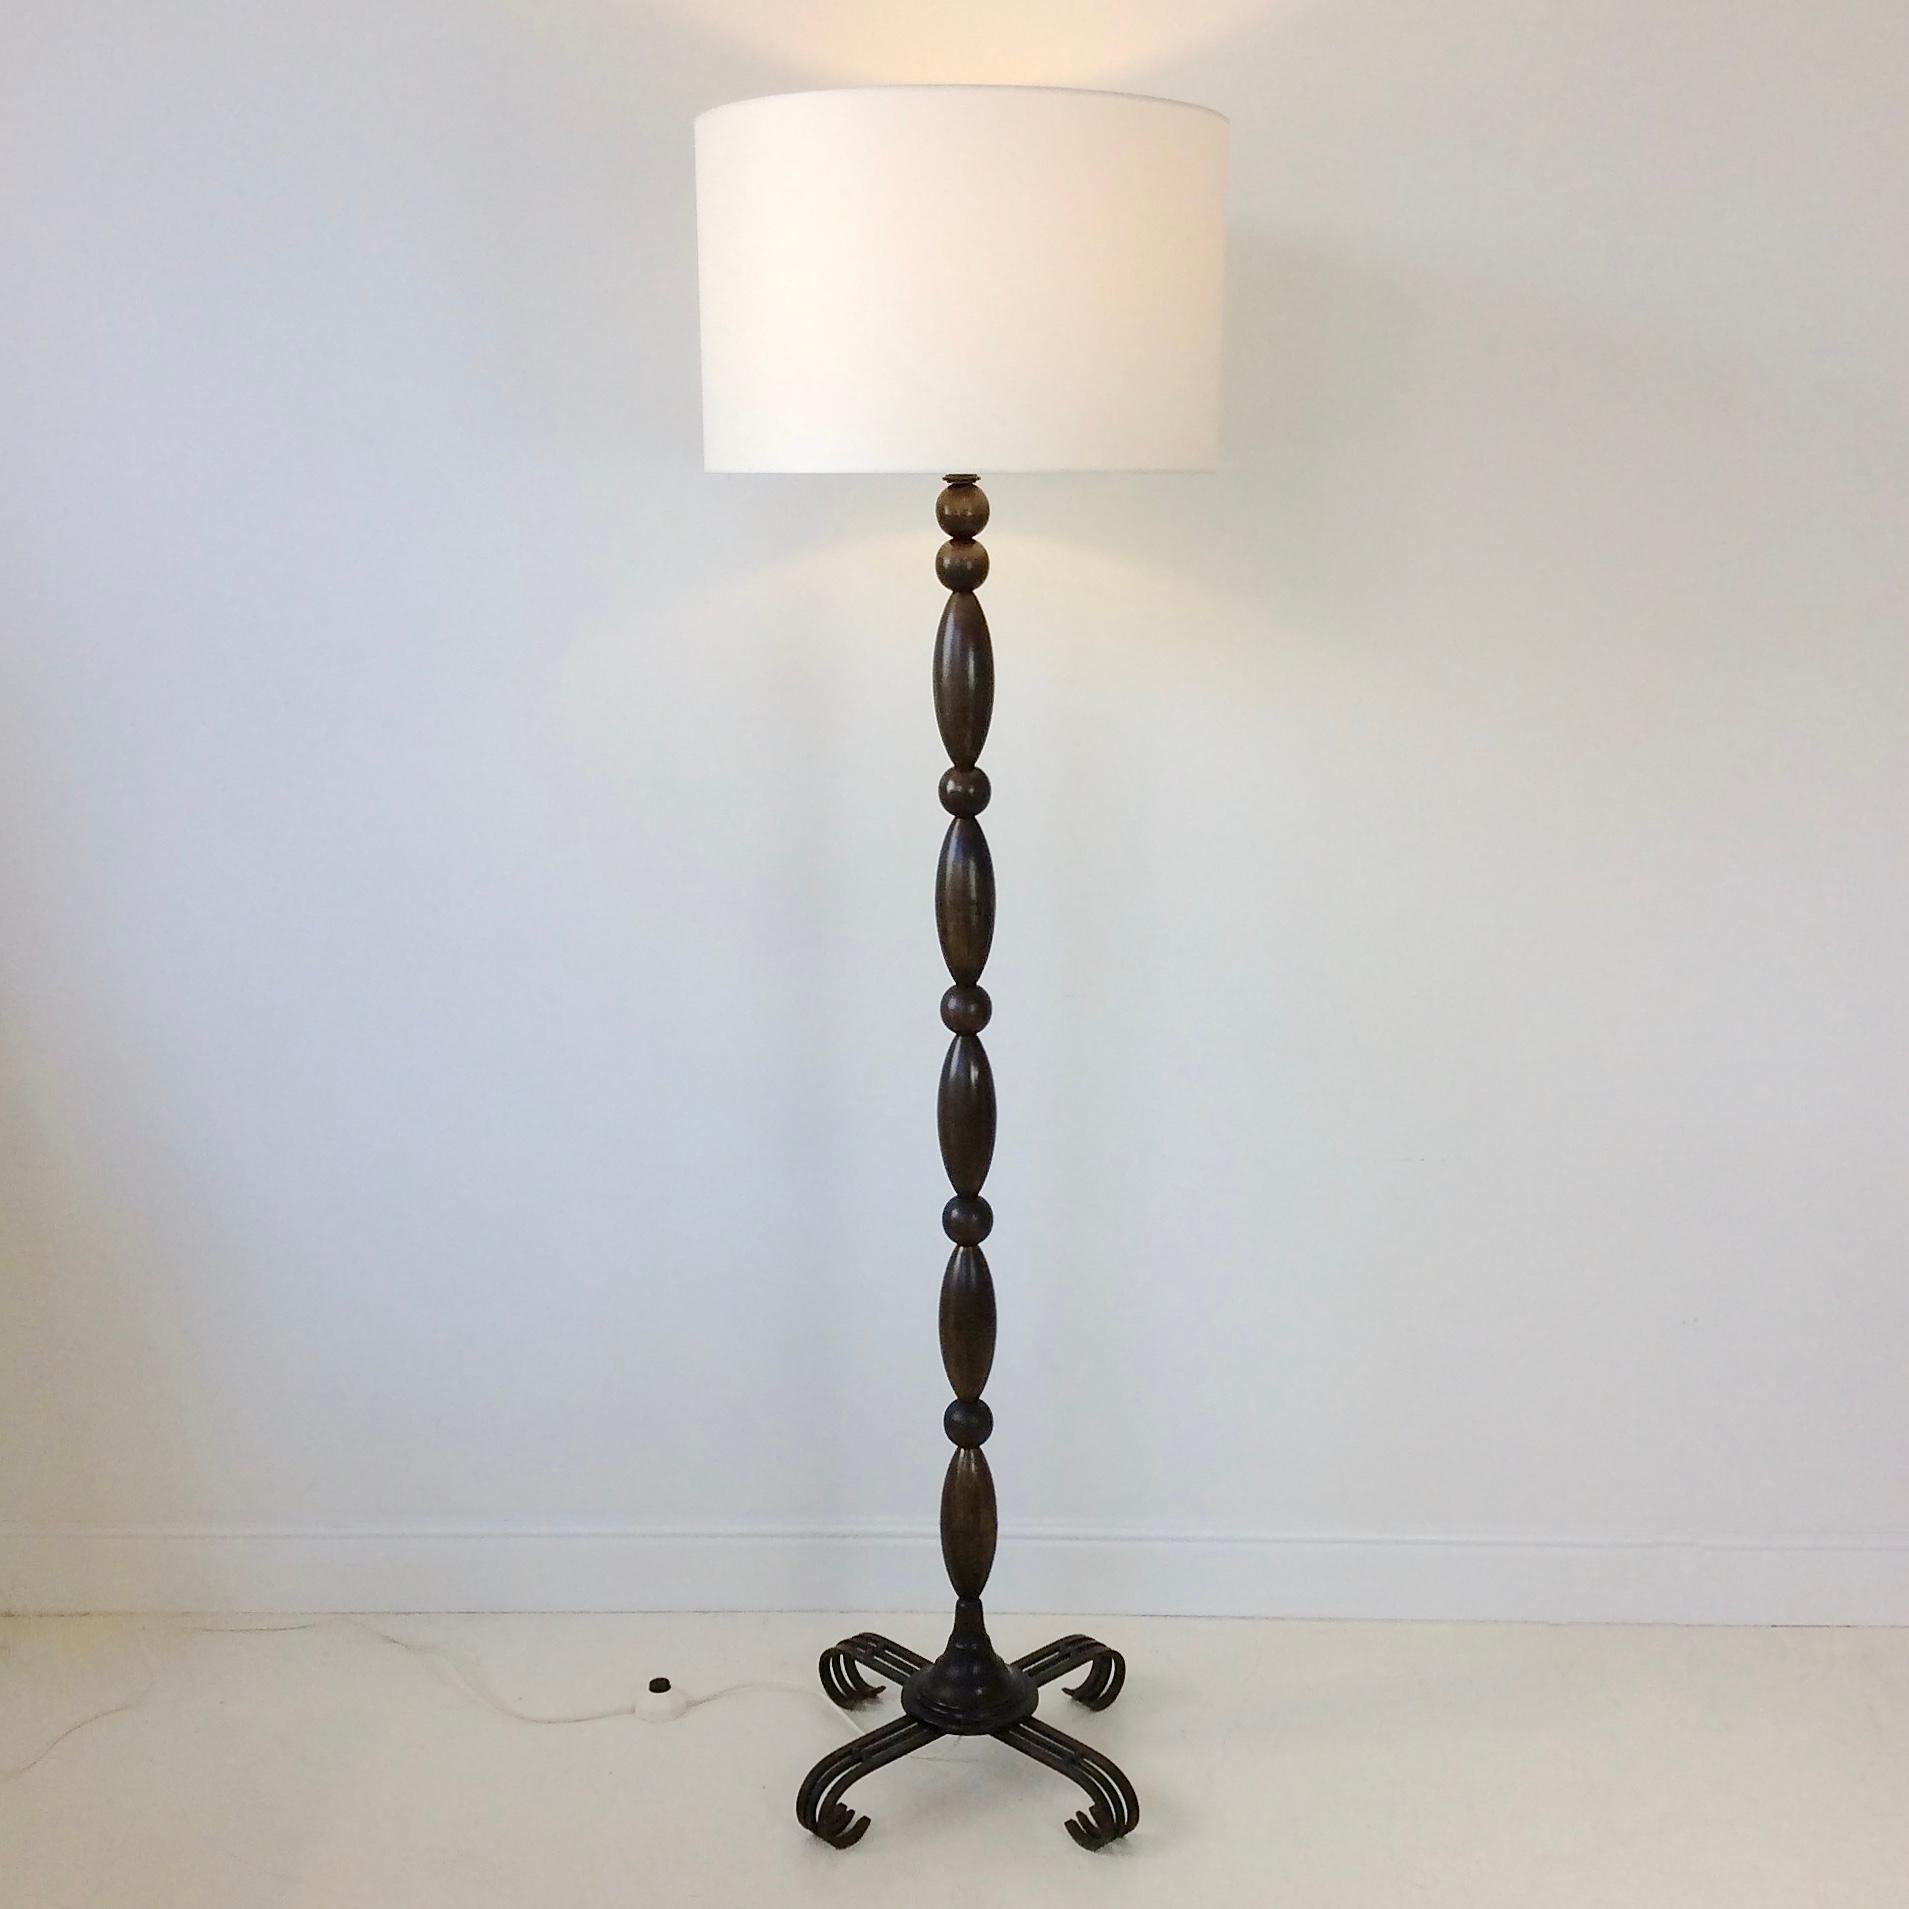 French Art Deco Floor Lamp, c.1940 France For Sale